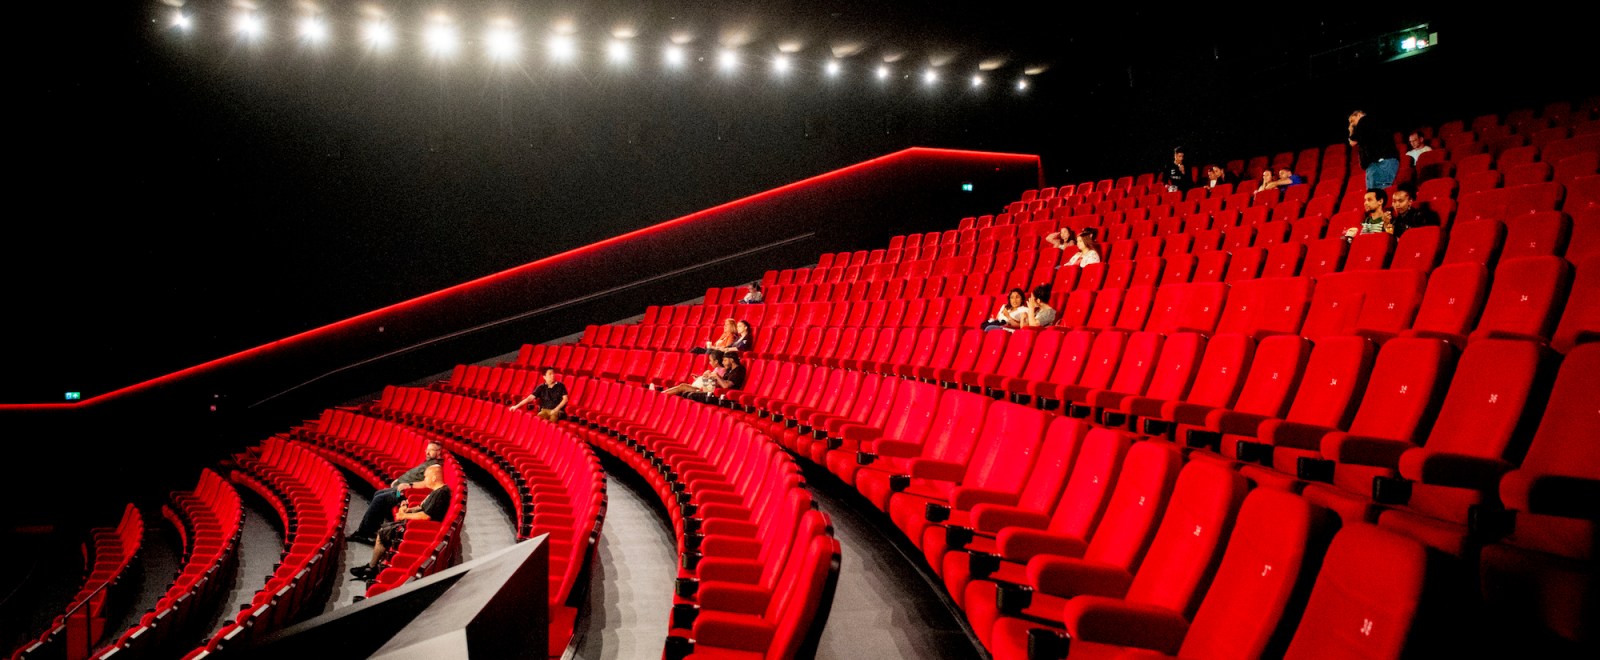 Movie-Theaters-GettyImages-1216849967.jpg